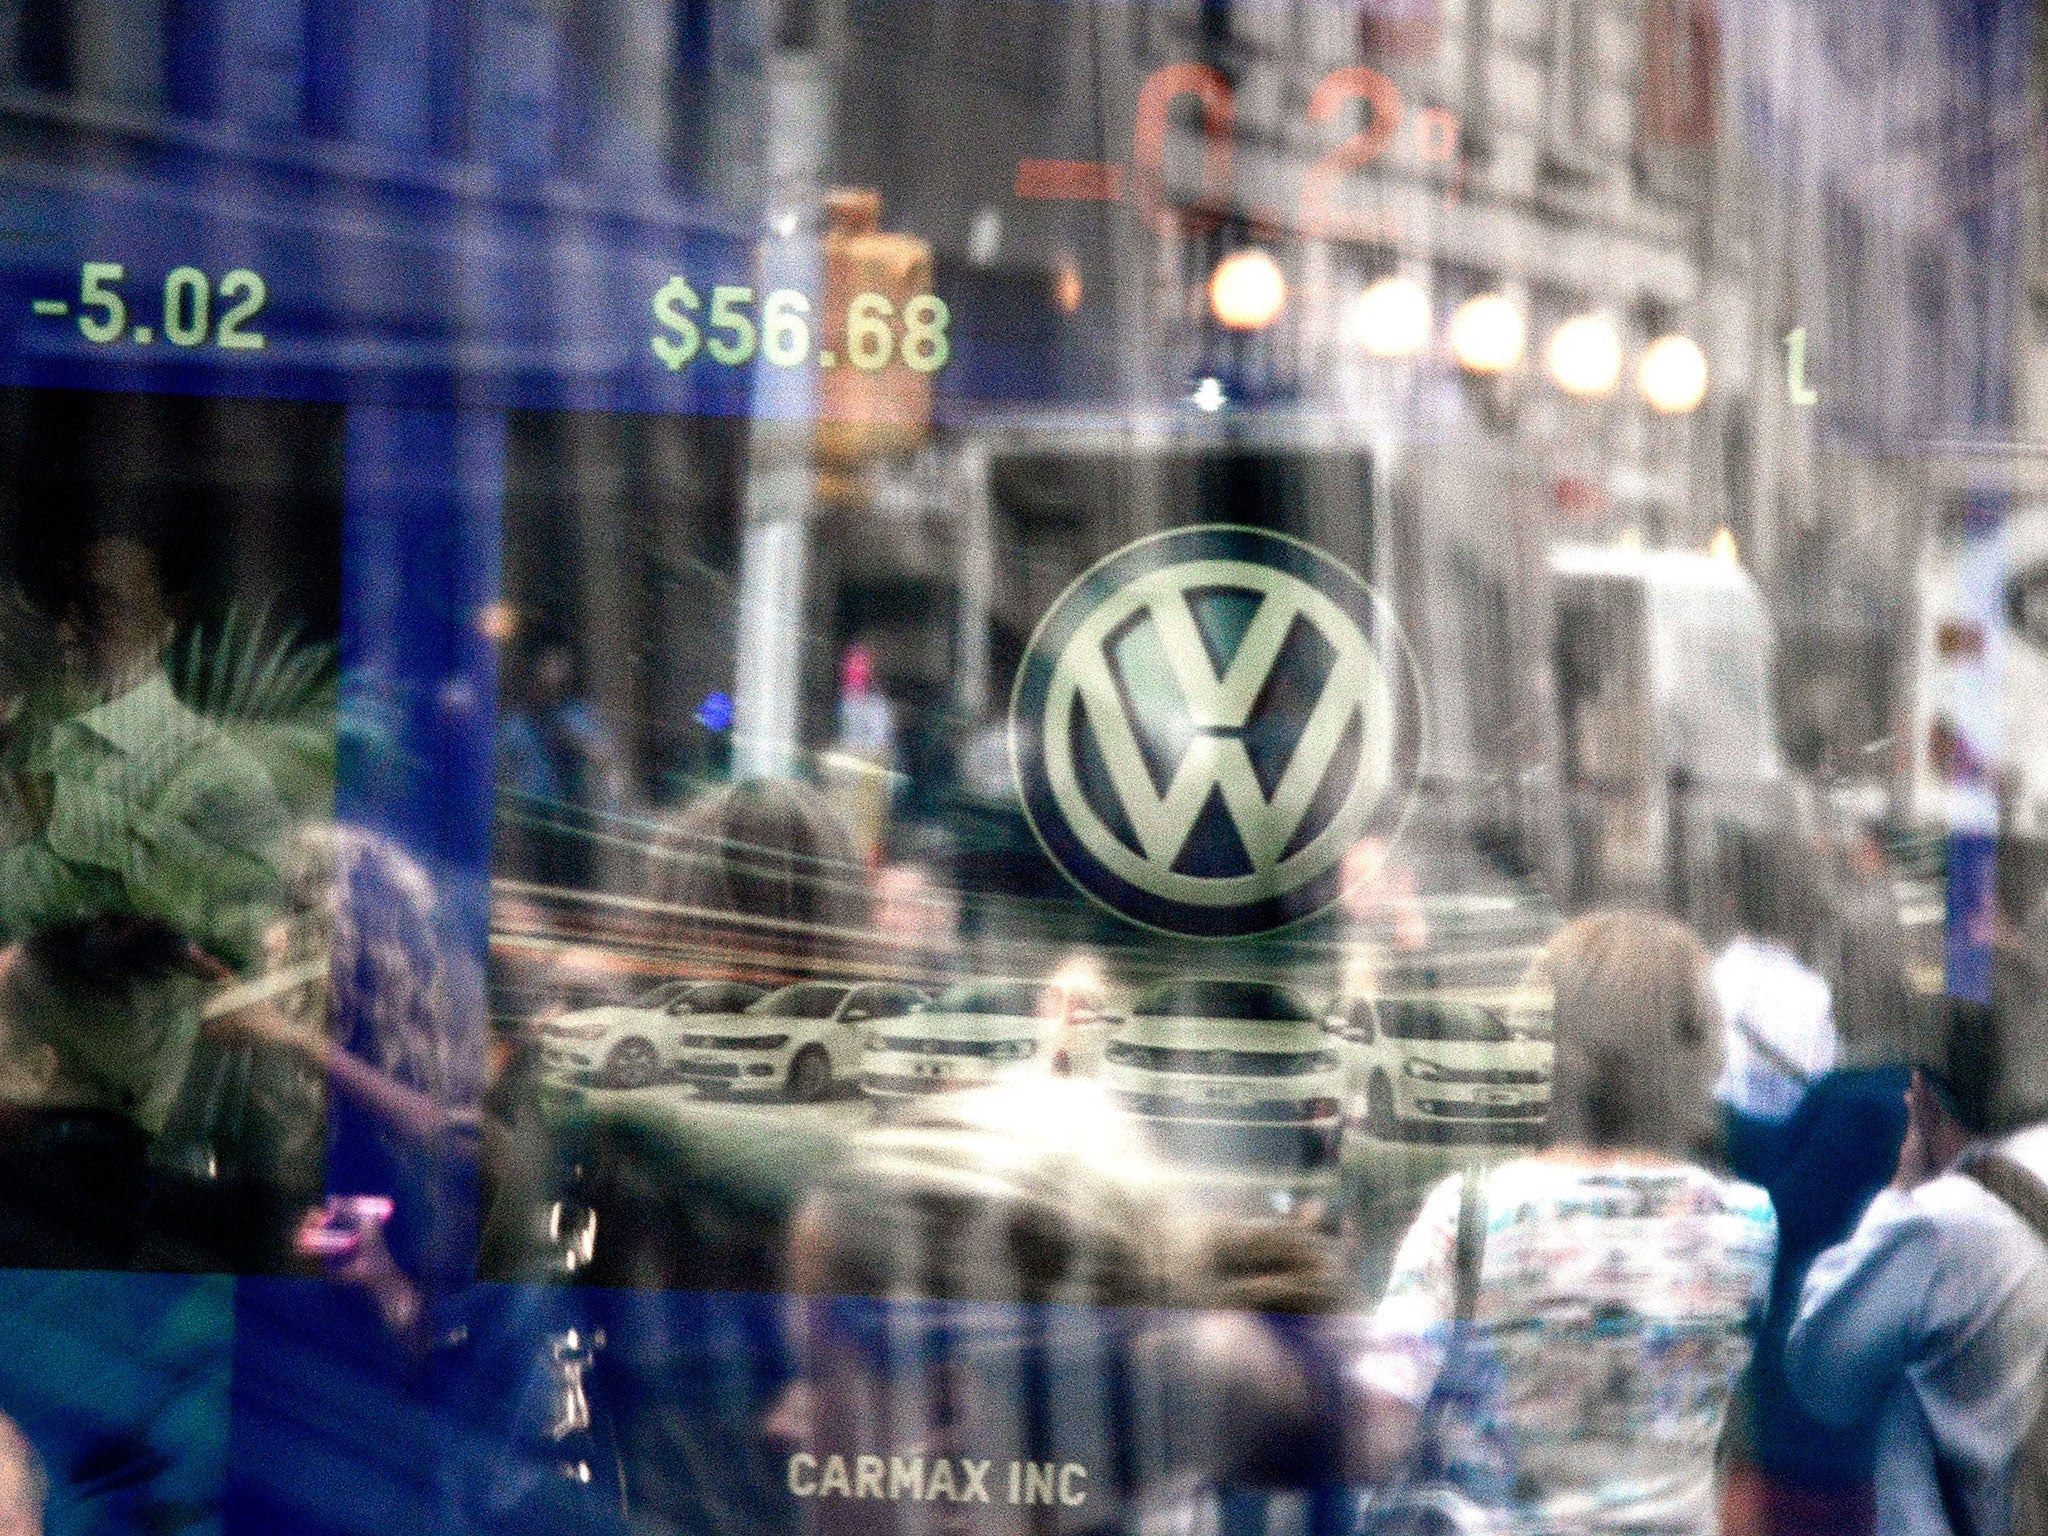 The Volkswagen logo on a screen at the NASDAQ stock market in Times Square in New York